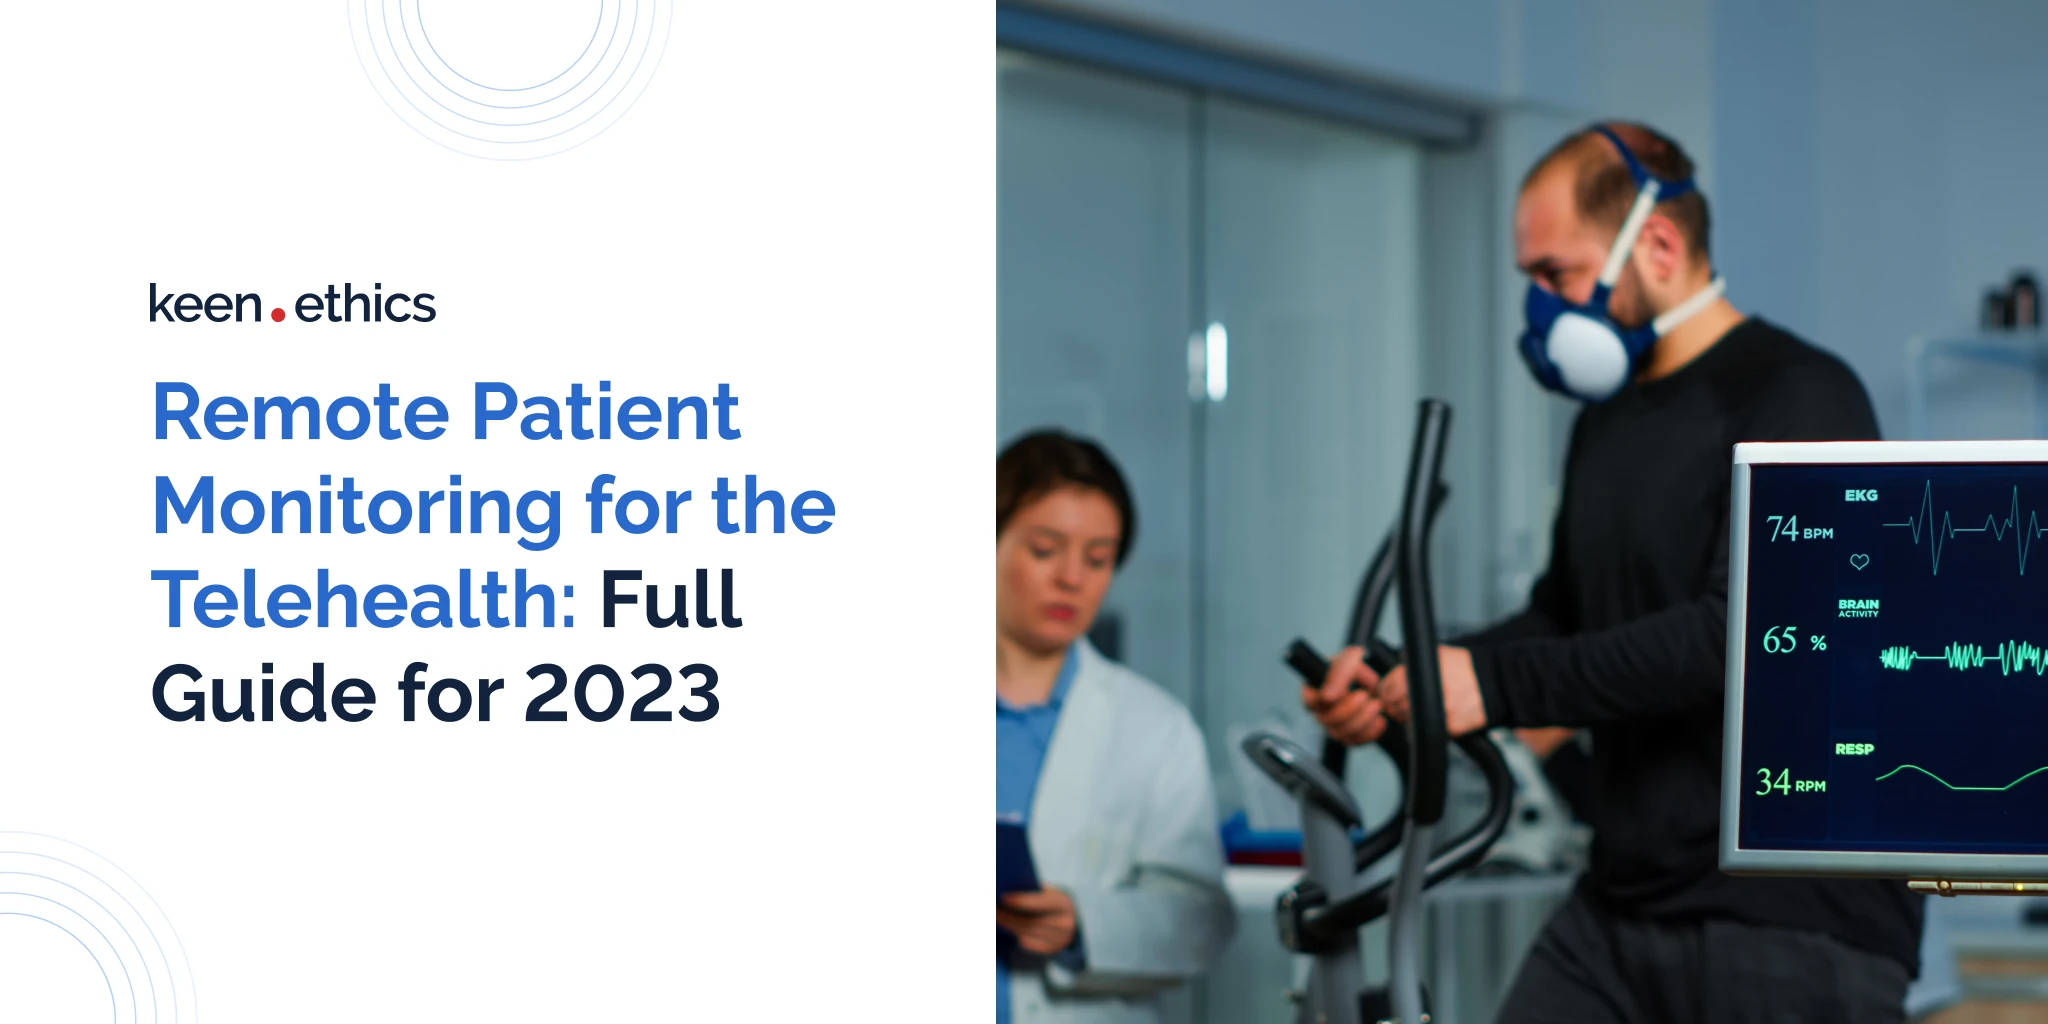 Remote Patient Monitoring for the telehealth: Full Guide for 2023